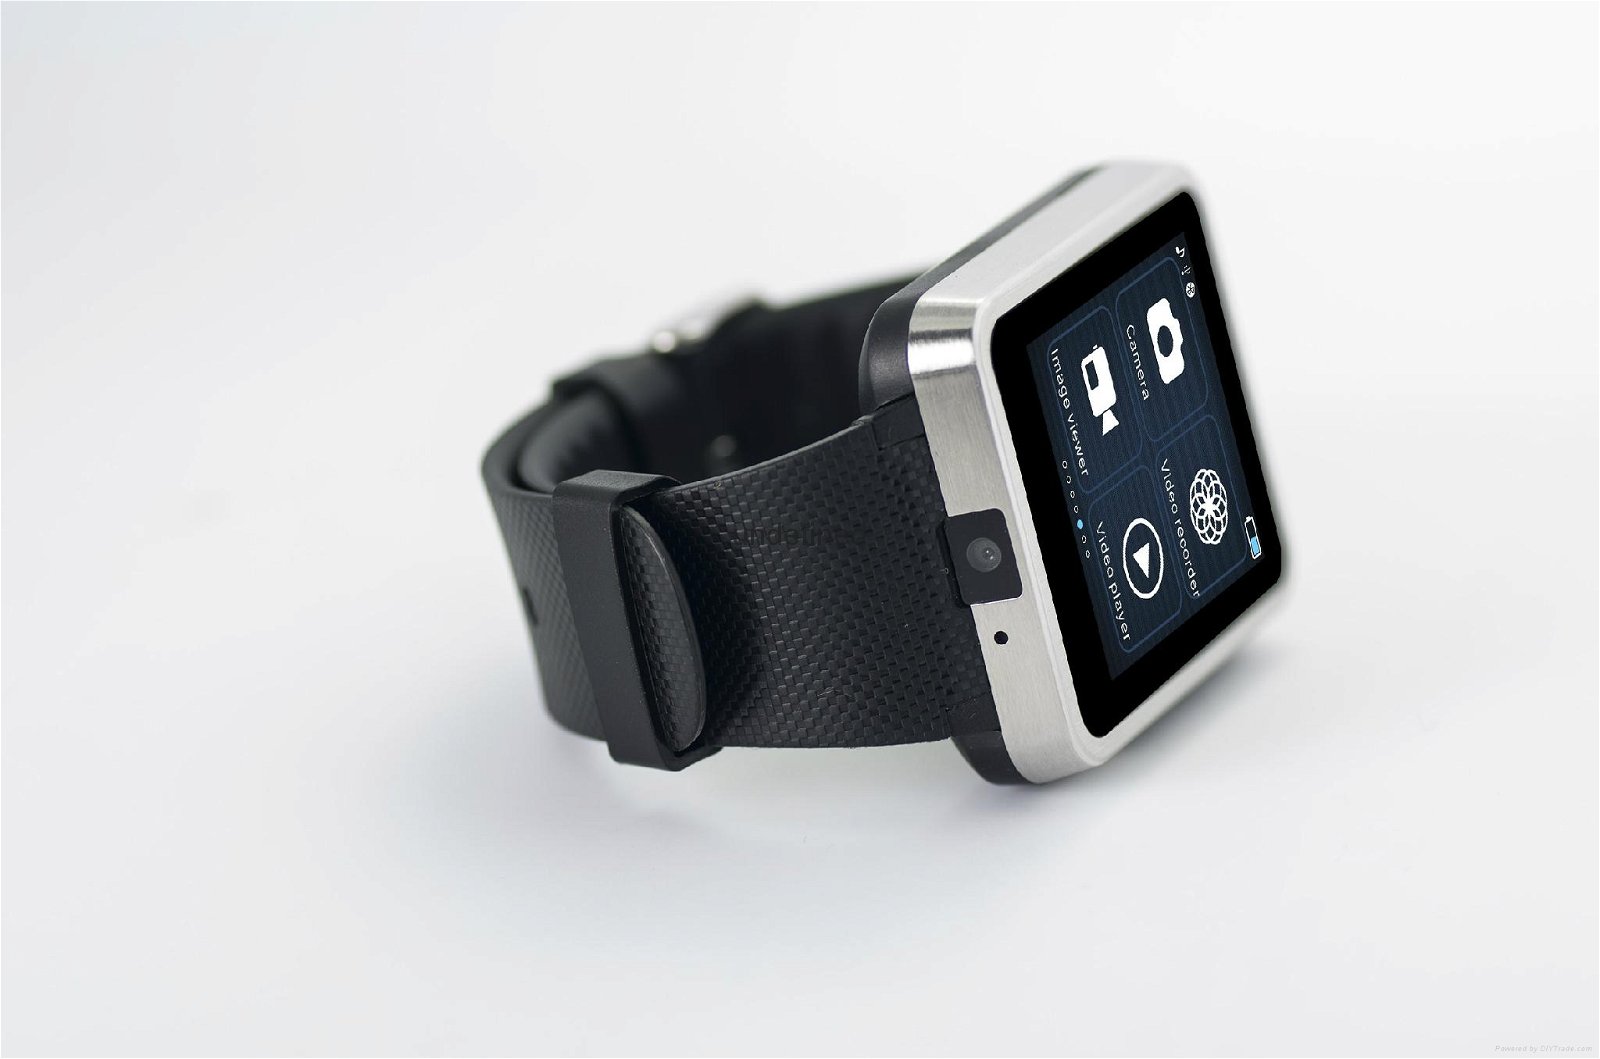 Mobile phone Smart Watch